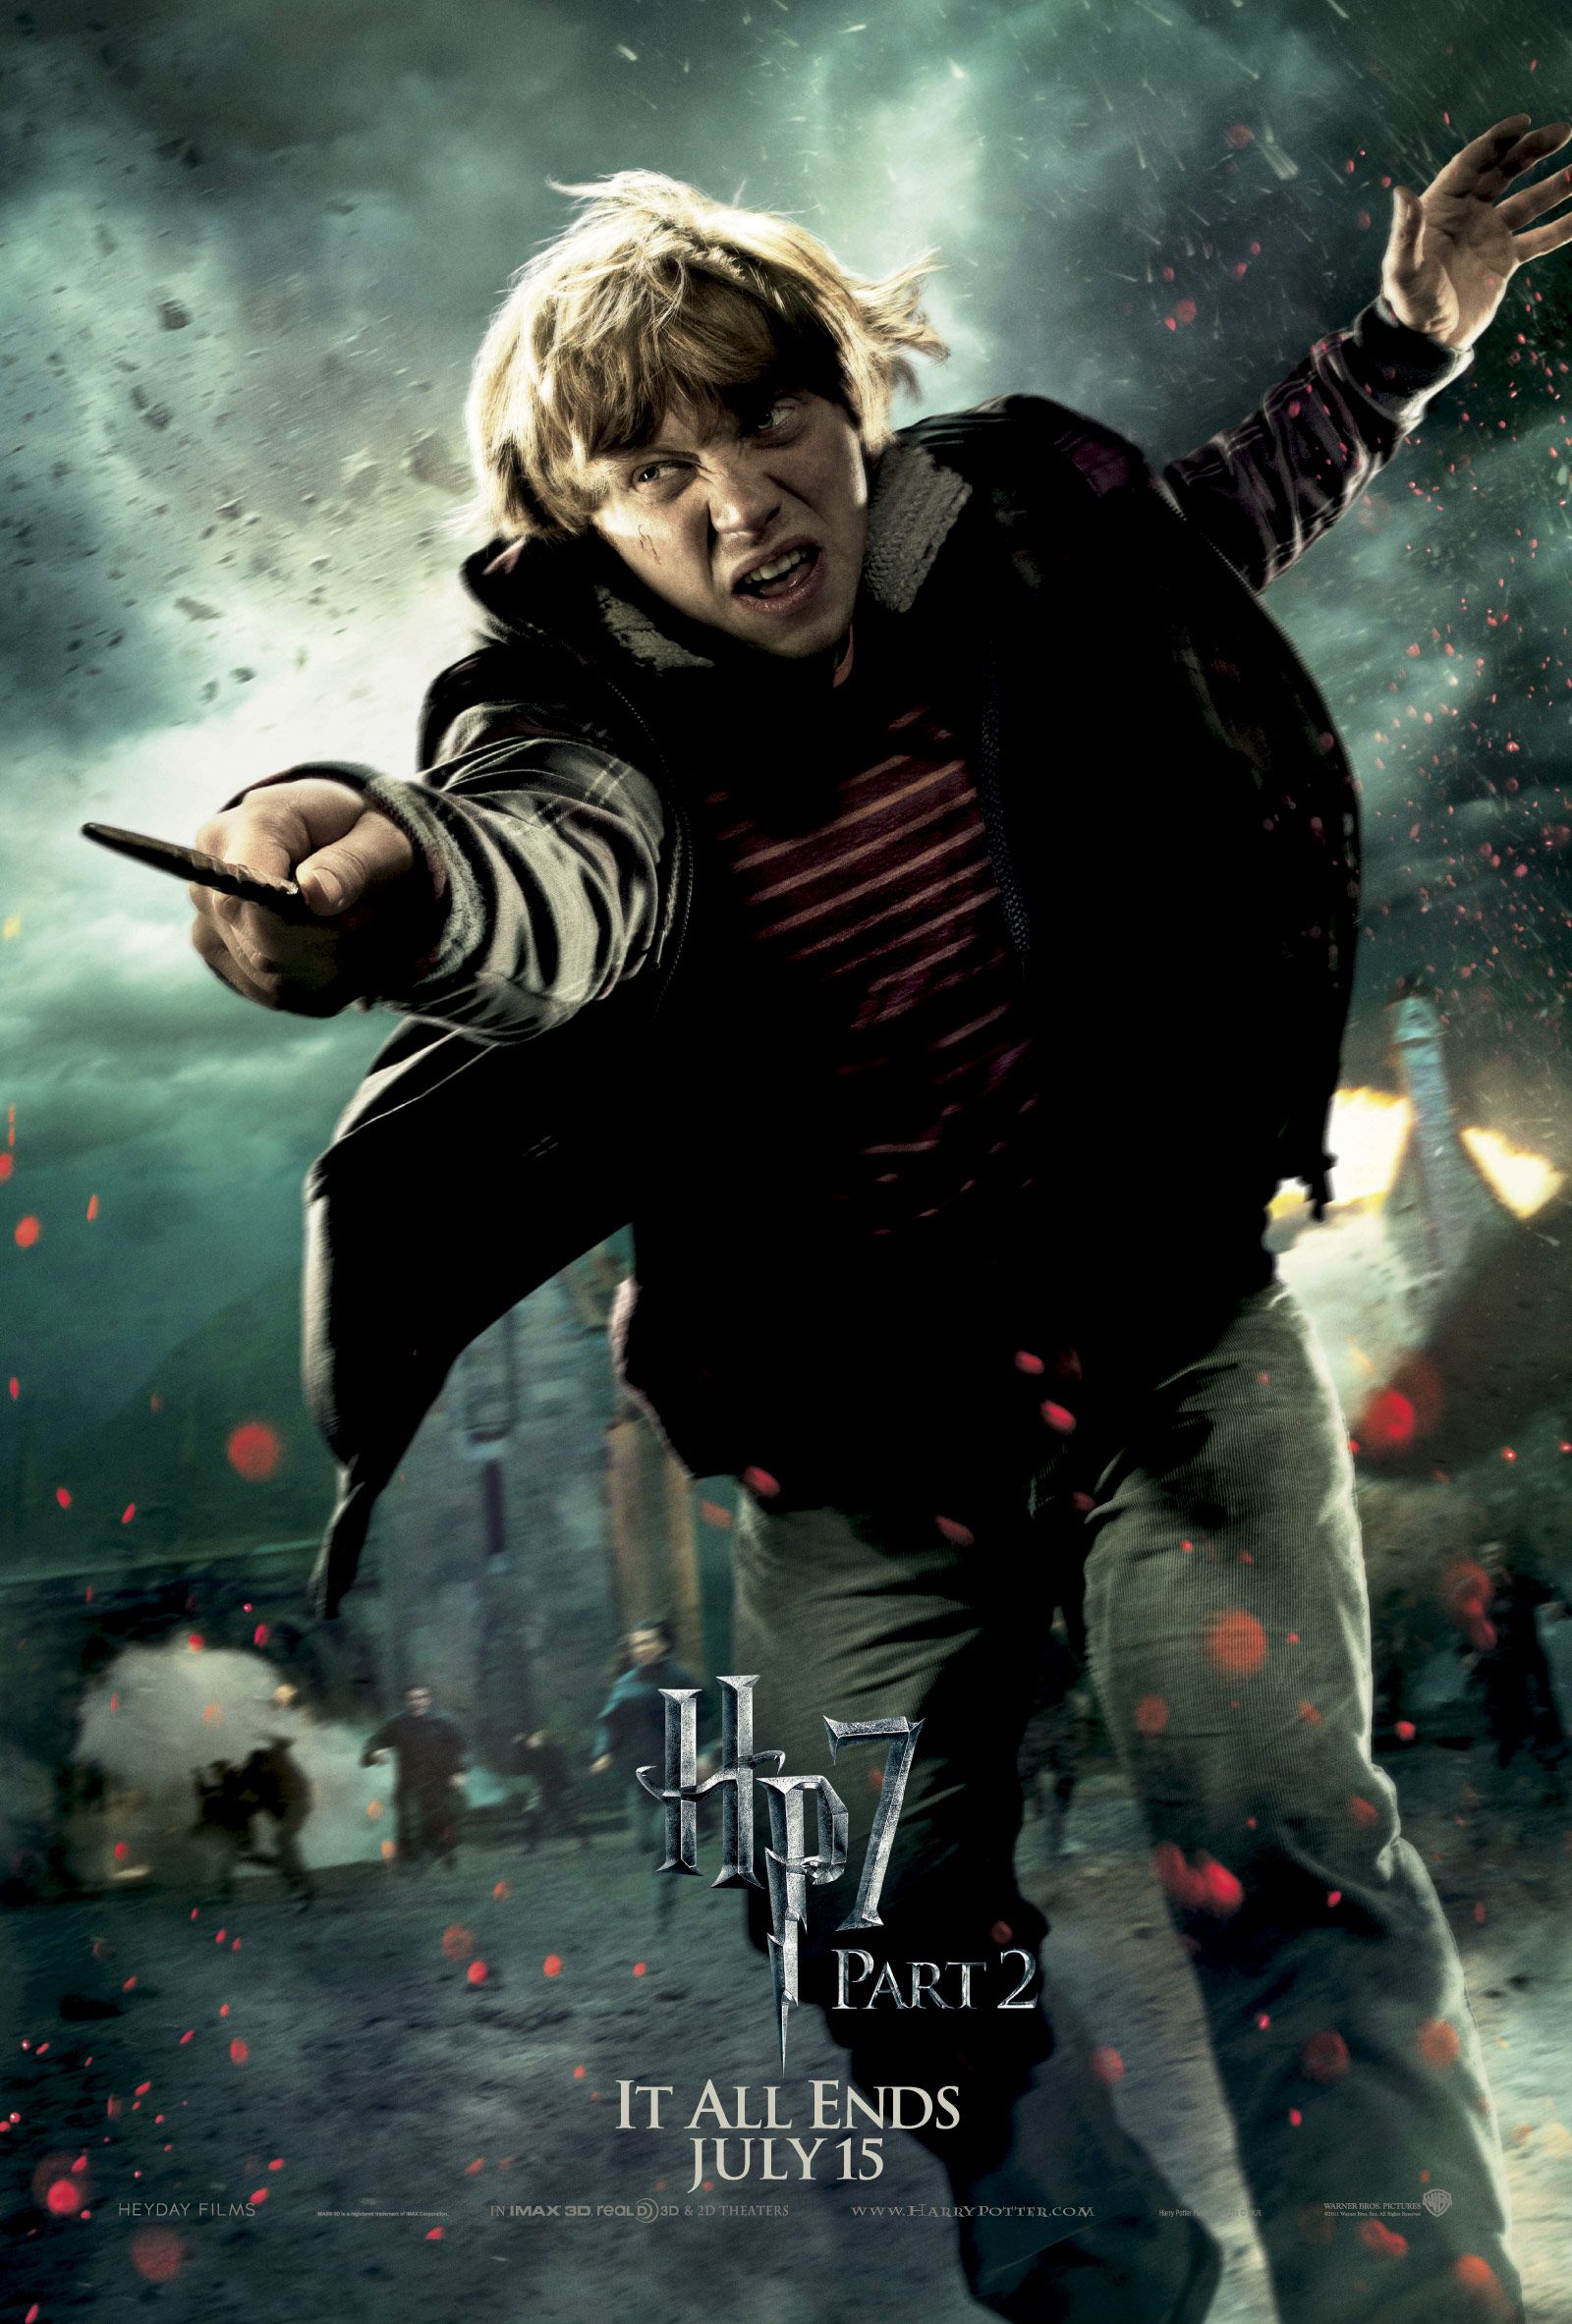 Harry Potter and the Deathly Hallows - Part 2 Ron Weasley Character Poster